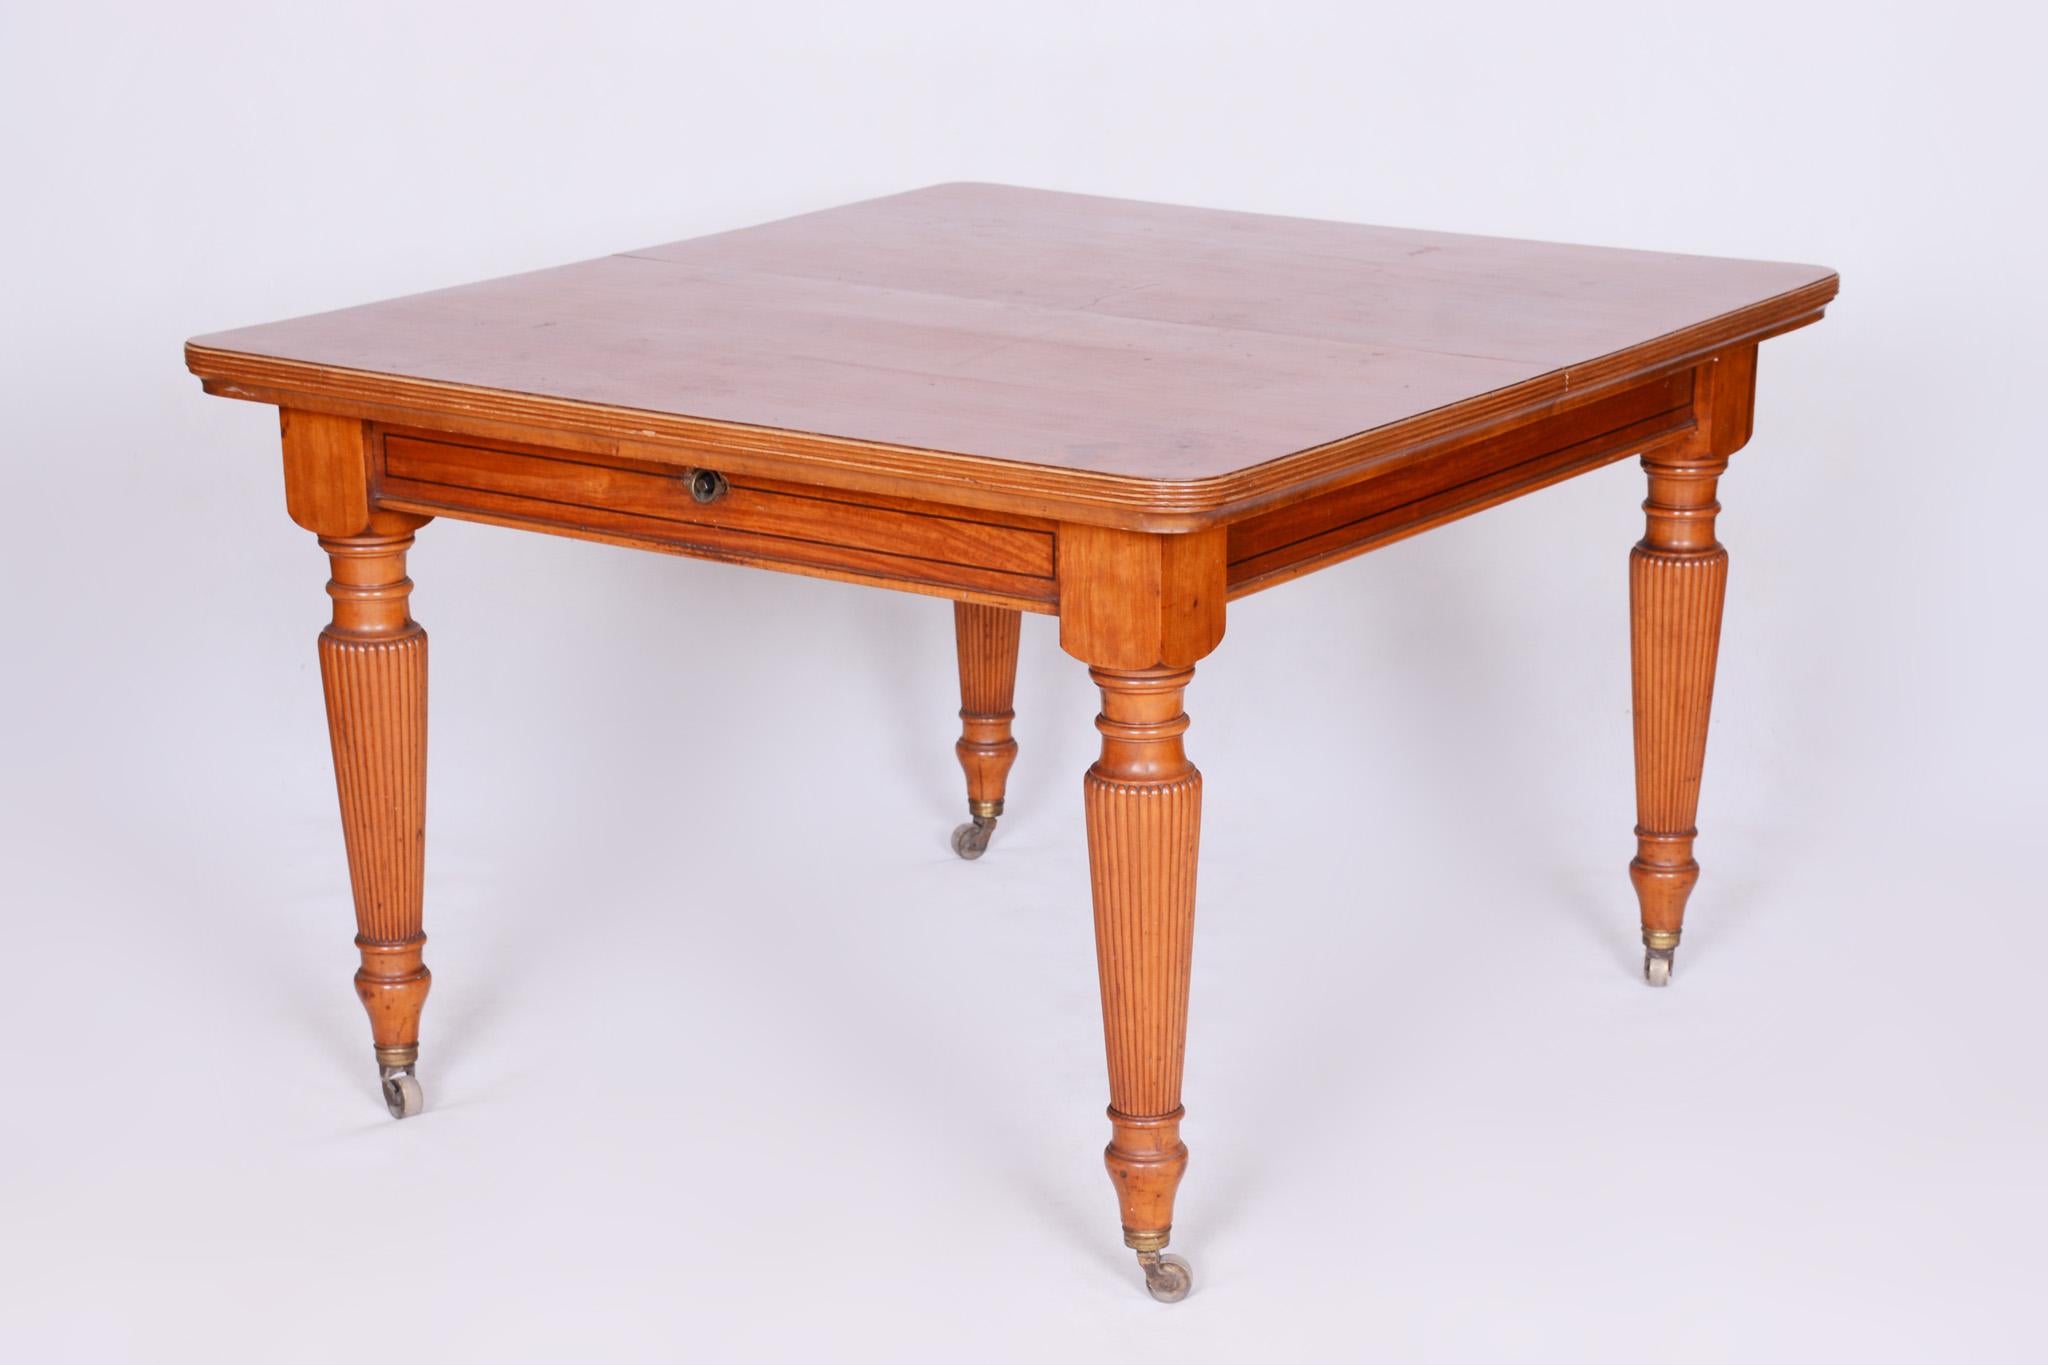 Individual items are not for sale separately.

A very popular supplier and manufacturer of furniture, Maple & Co.
It is a perfect example of the English aristocracy and is still in great demand.

The whole set is remarkable in that it has been kept